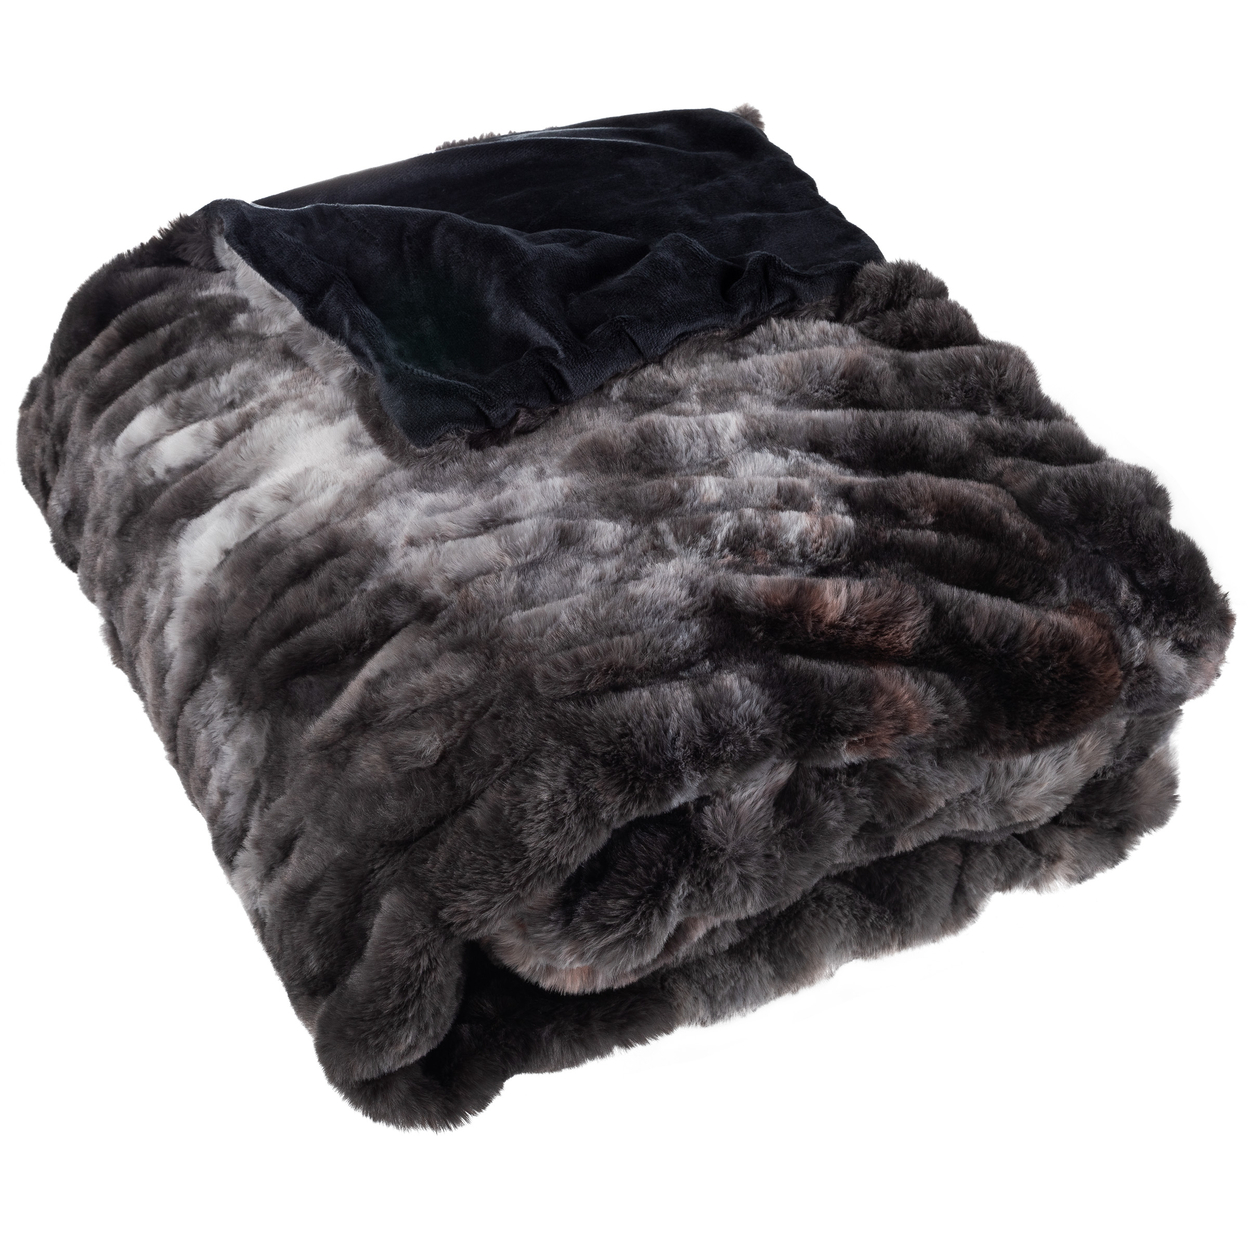 Faux Fur Ruched Jacquard Queen XL Oversized Throw 80 X 60 In Soft Luxurious